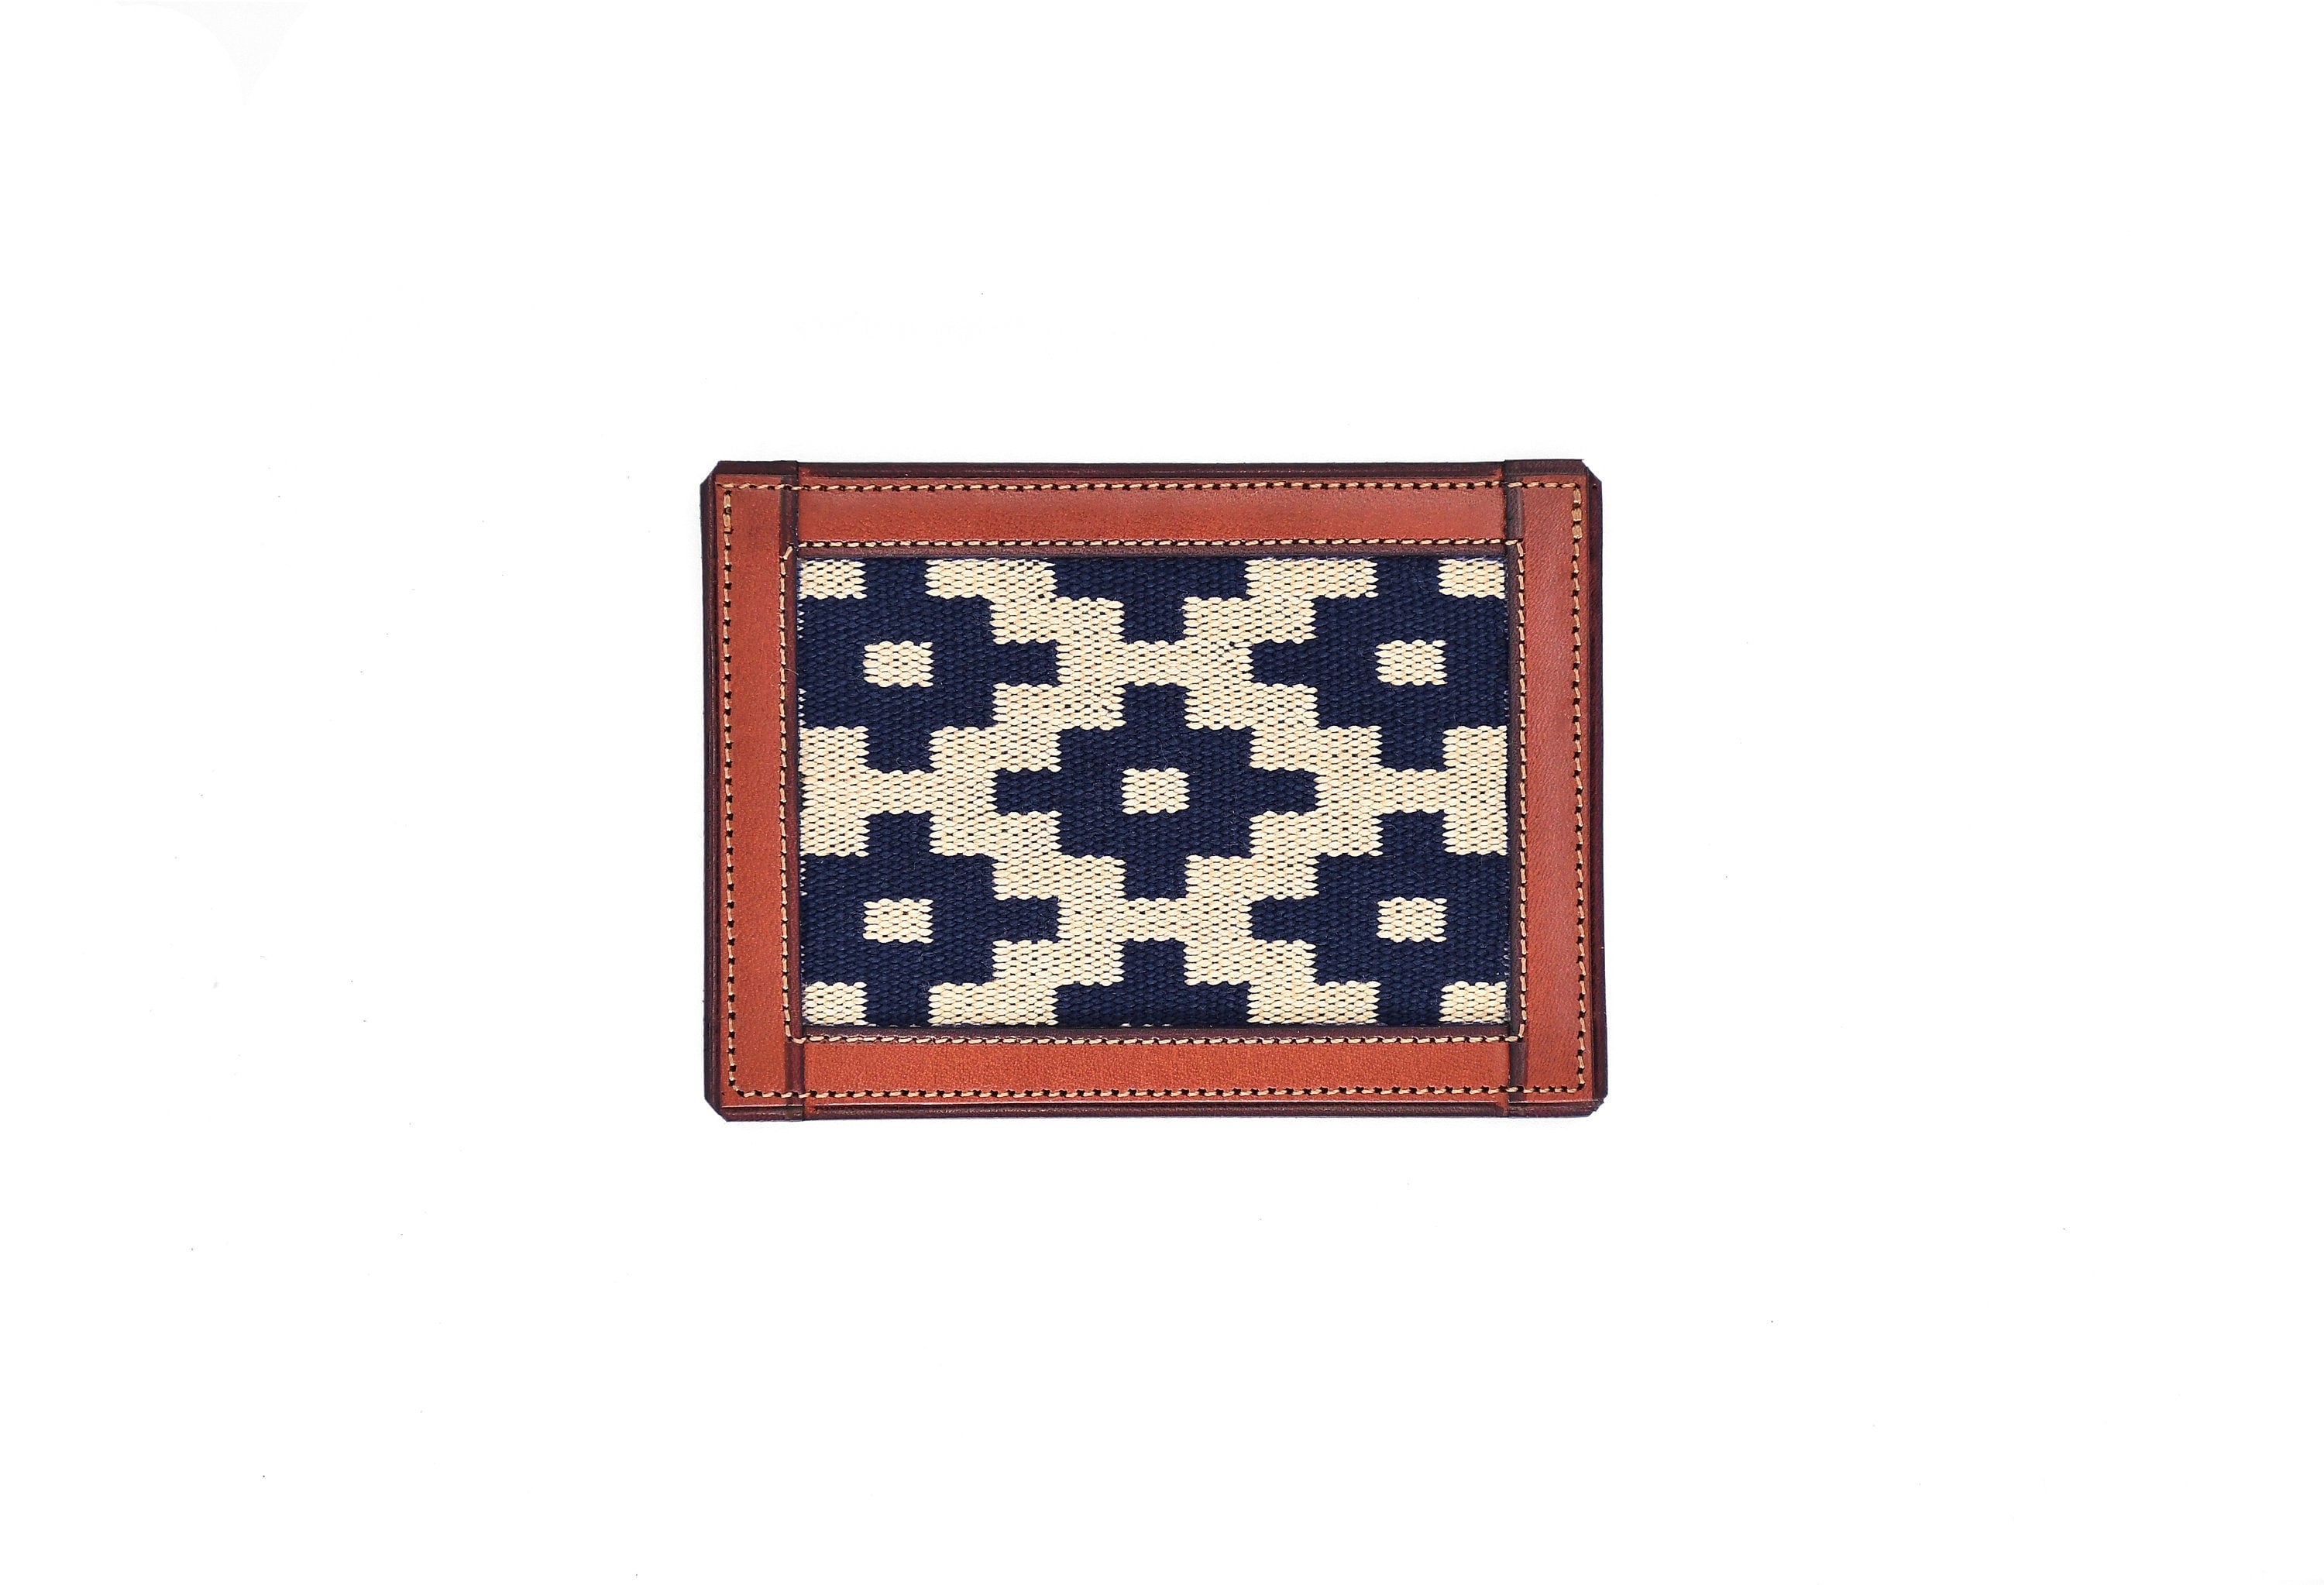 Gaucholife Wallet Tan Thin Woven Leather Card Holder (Cross)